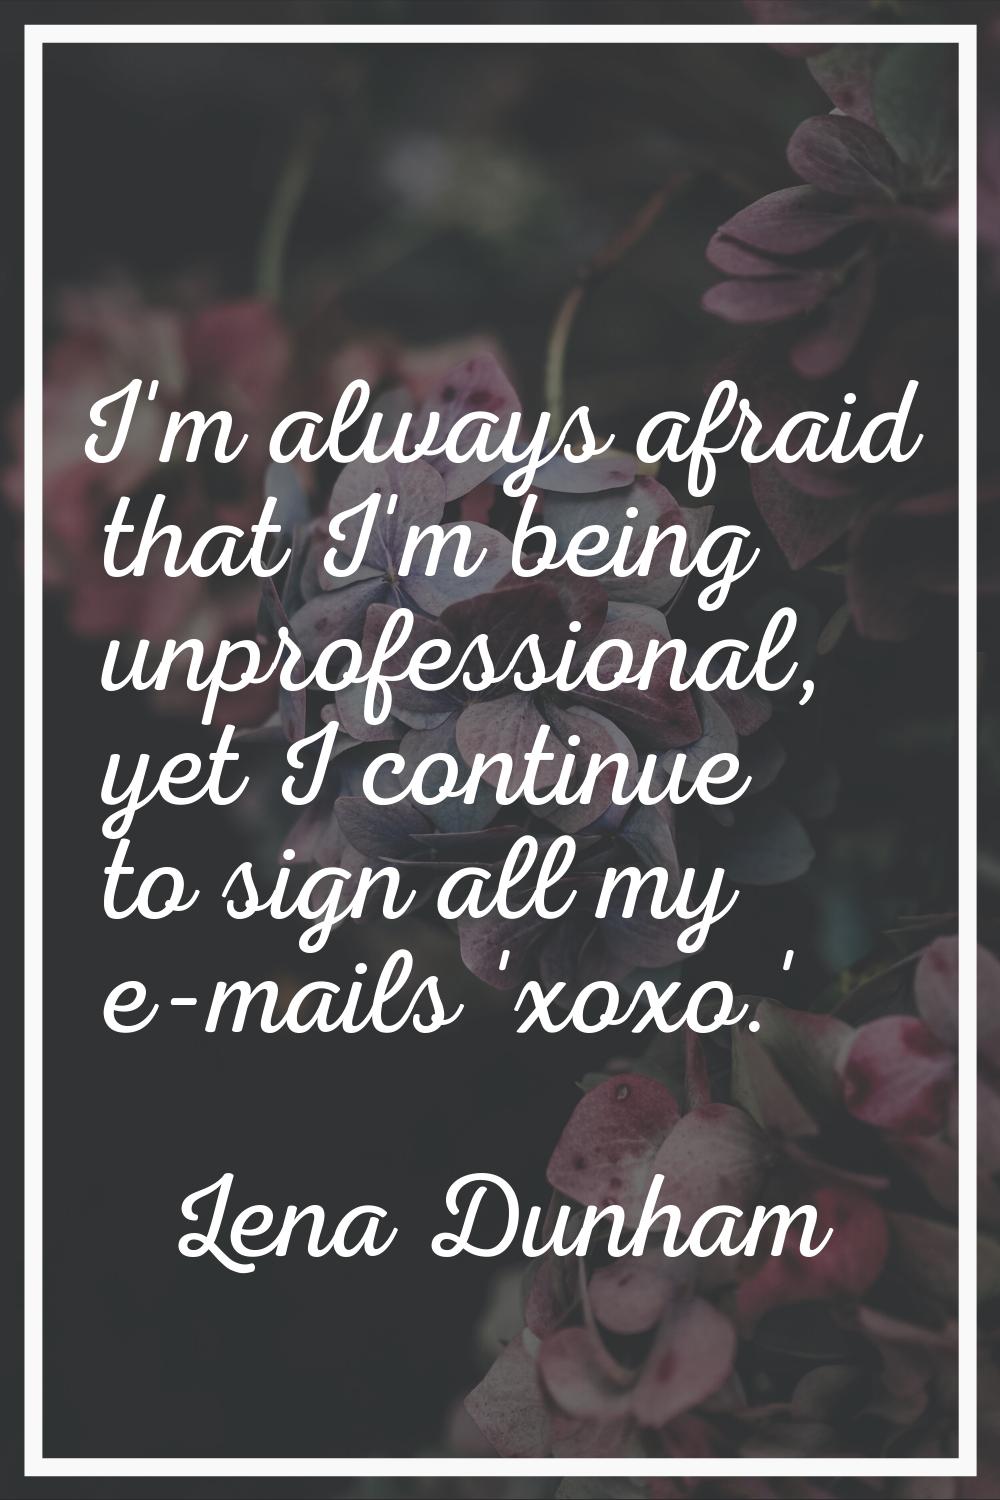 I'm always afraid that I'm being unprofessional, yet I continue to sign all my e-mails 'xoxo.'